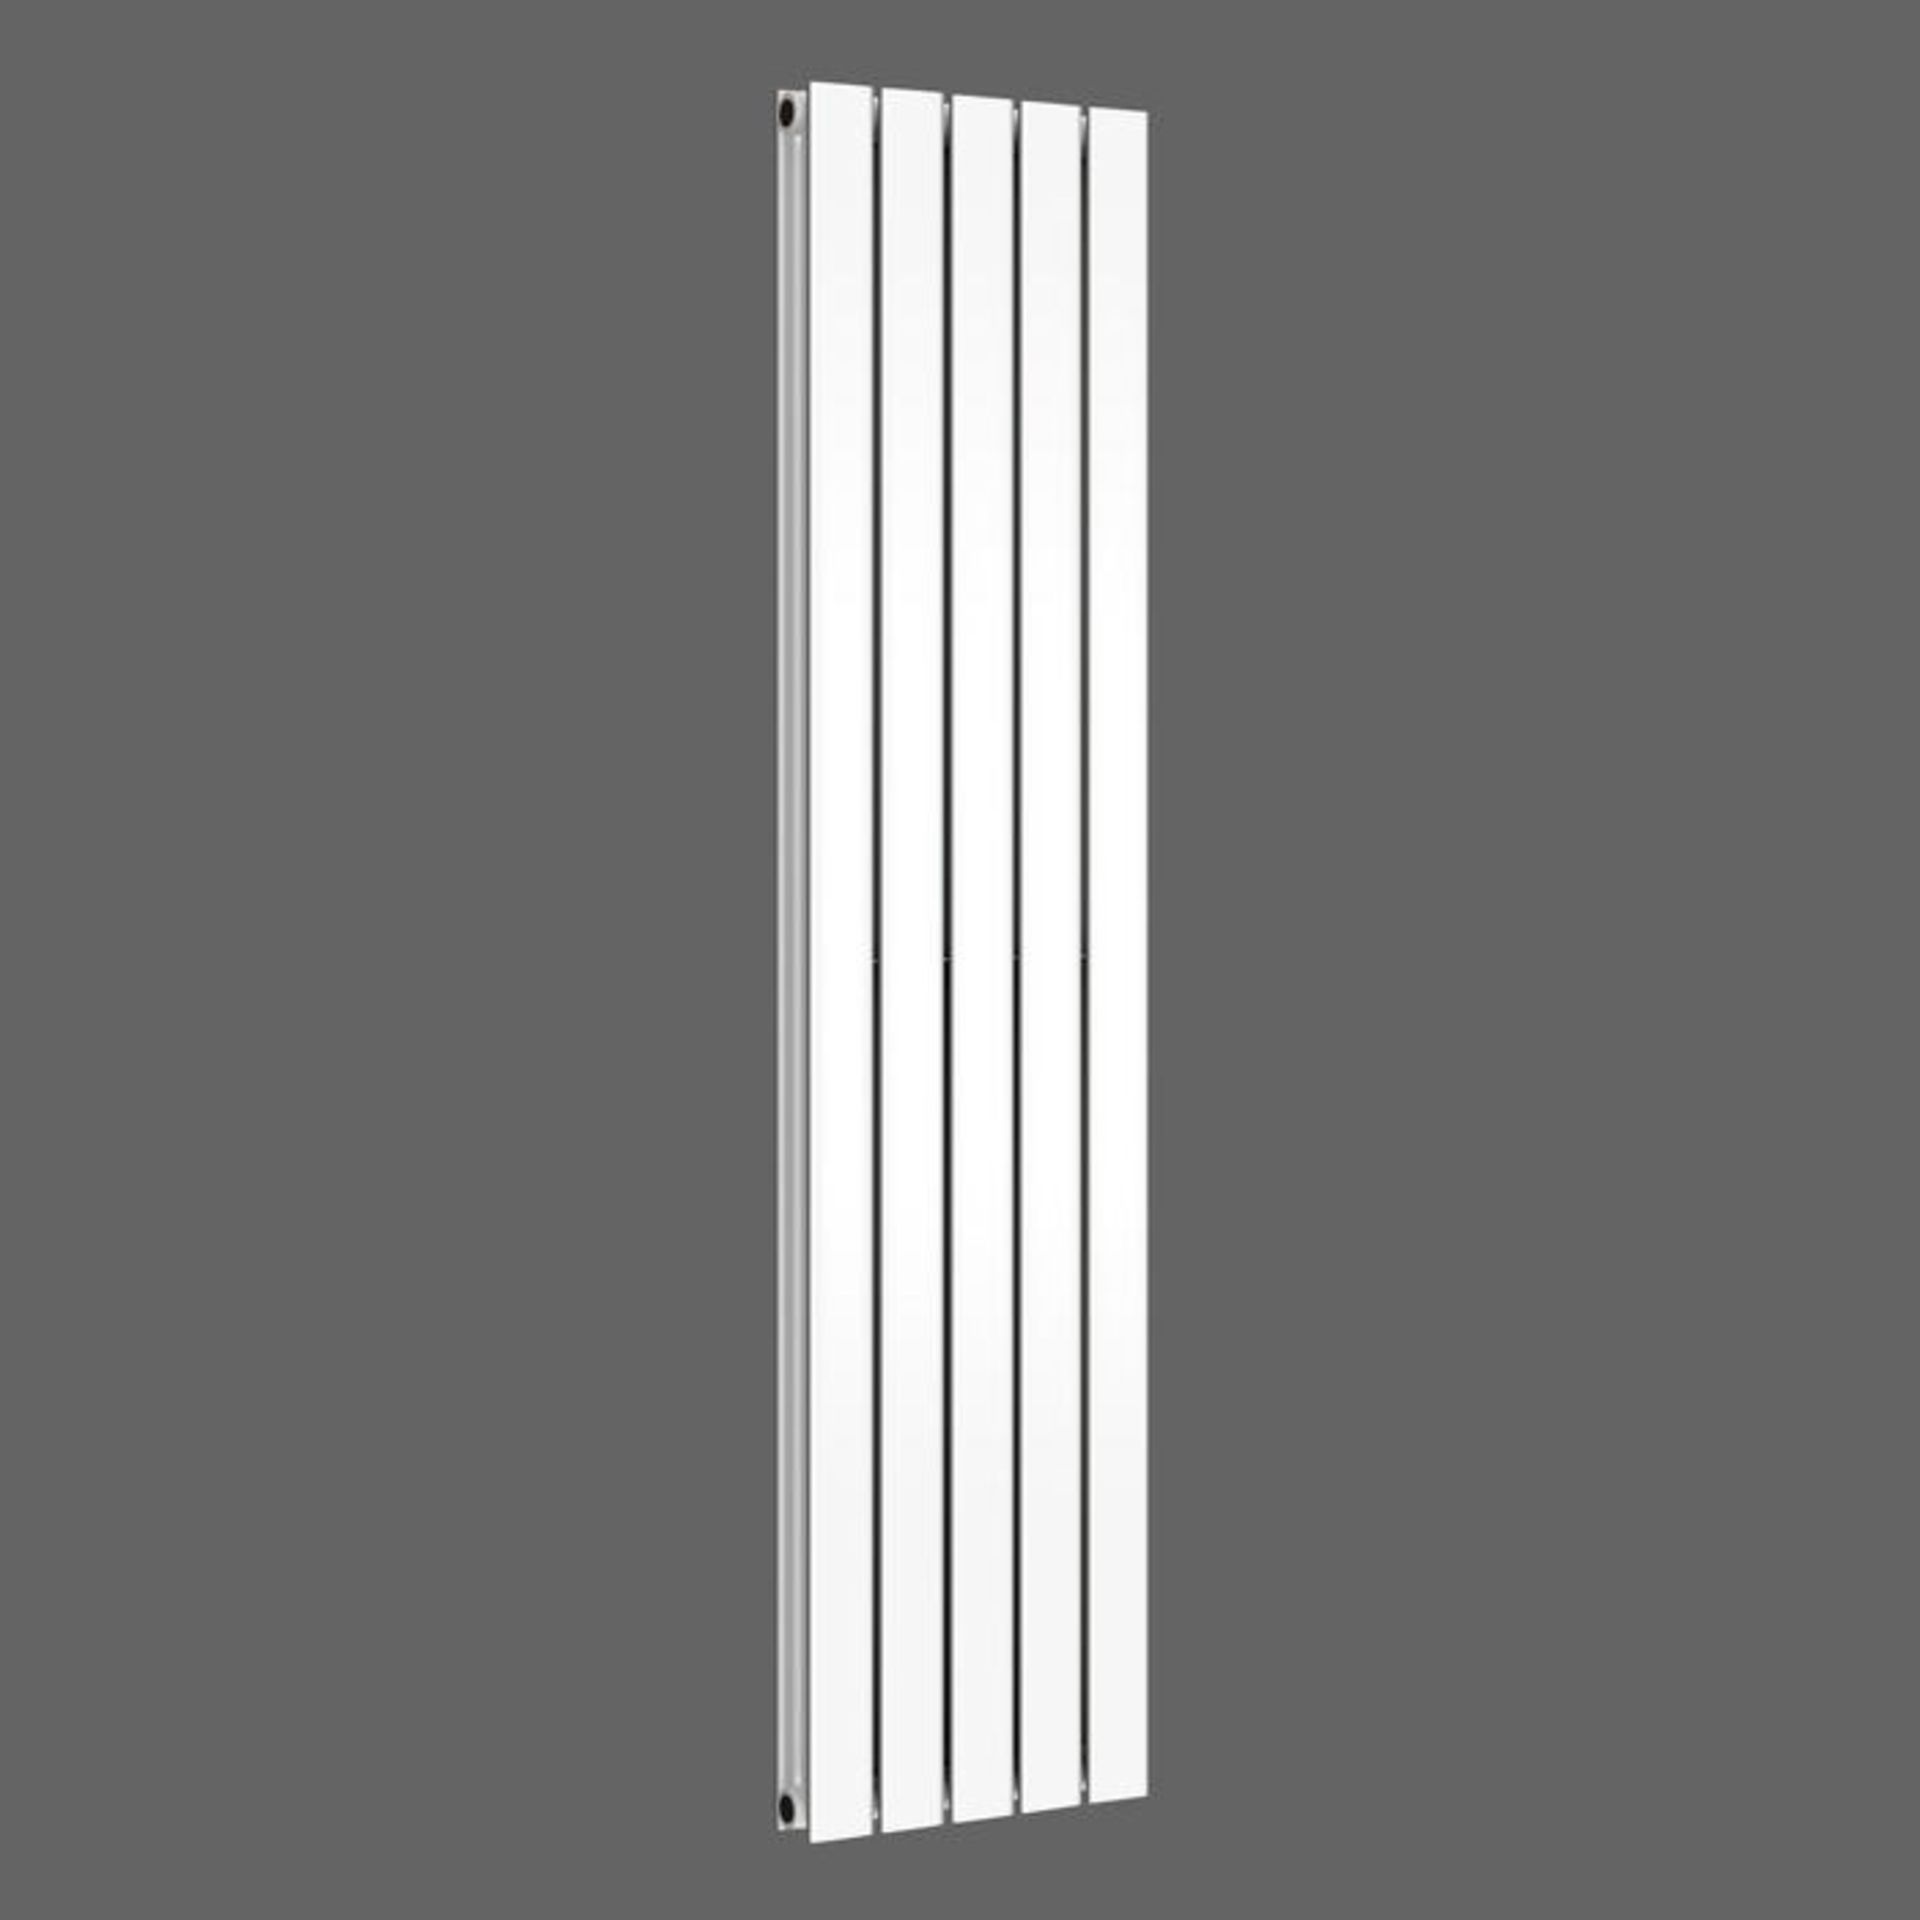 New 1600x360mm Gloss White Double Flat Panel Vertical Radiator. RRP £382.99.We Love This Beca - Image 2 of 2